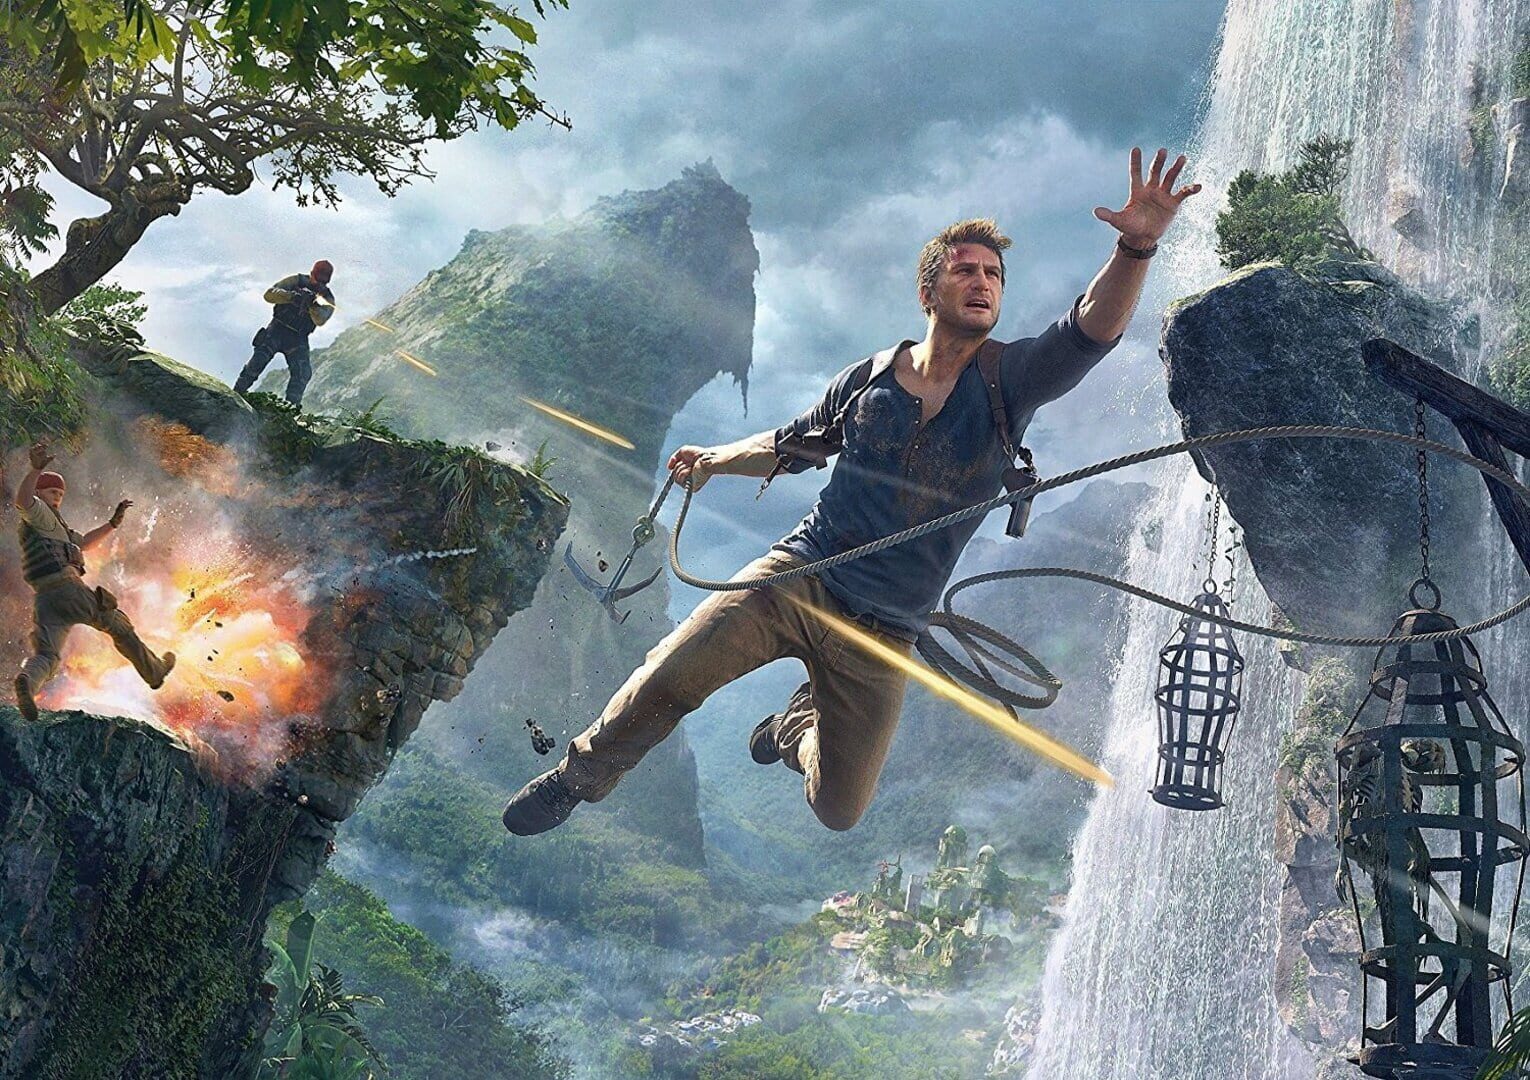 Artwork for Uncharted 4: A Thief's End